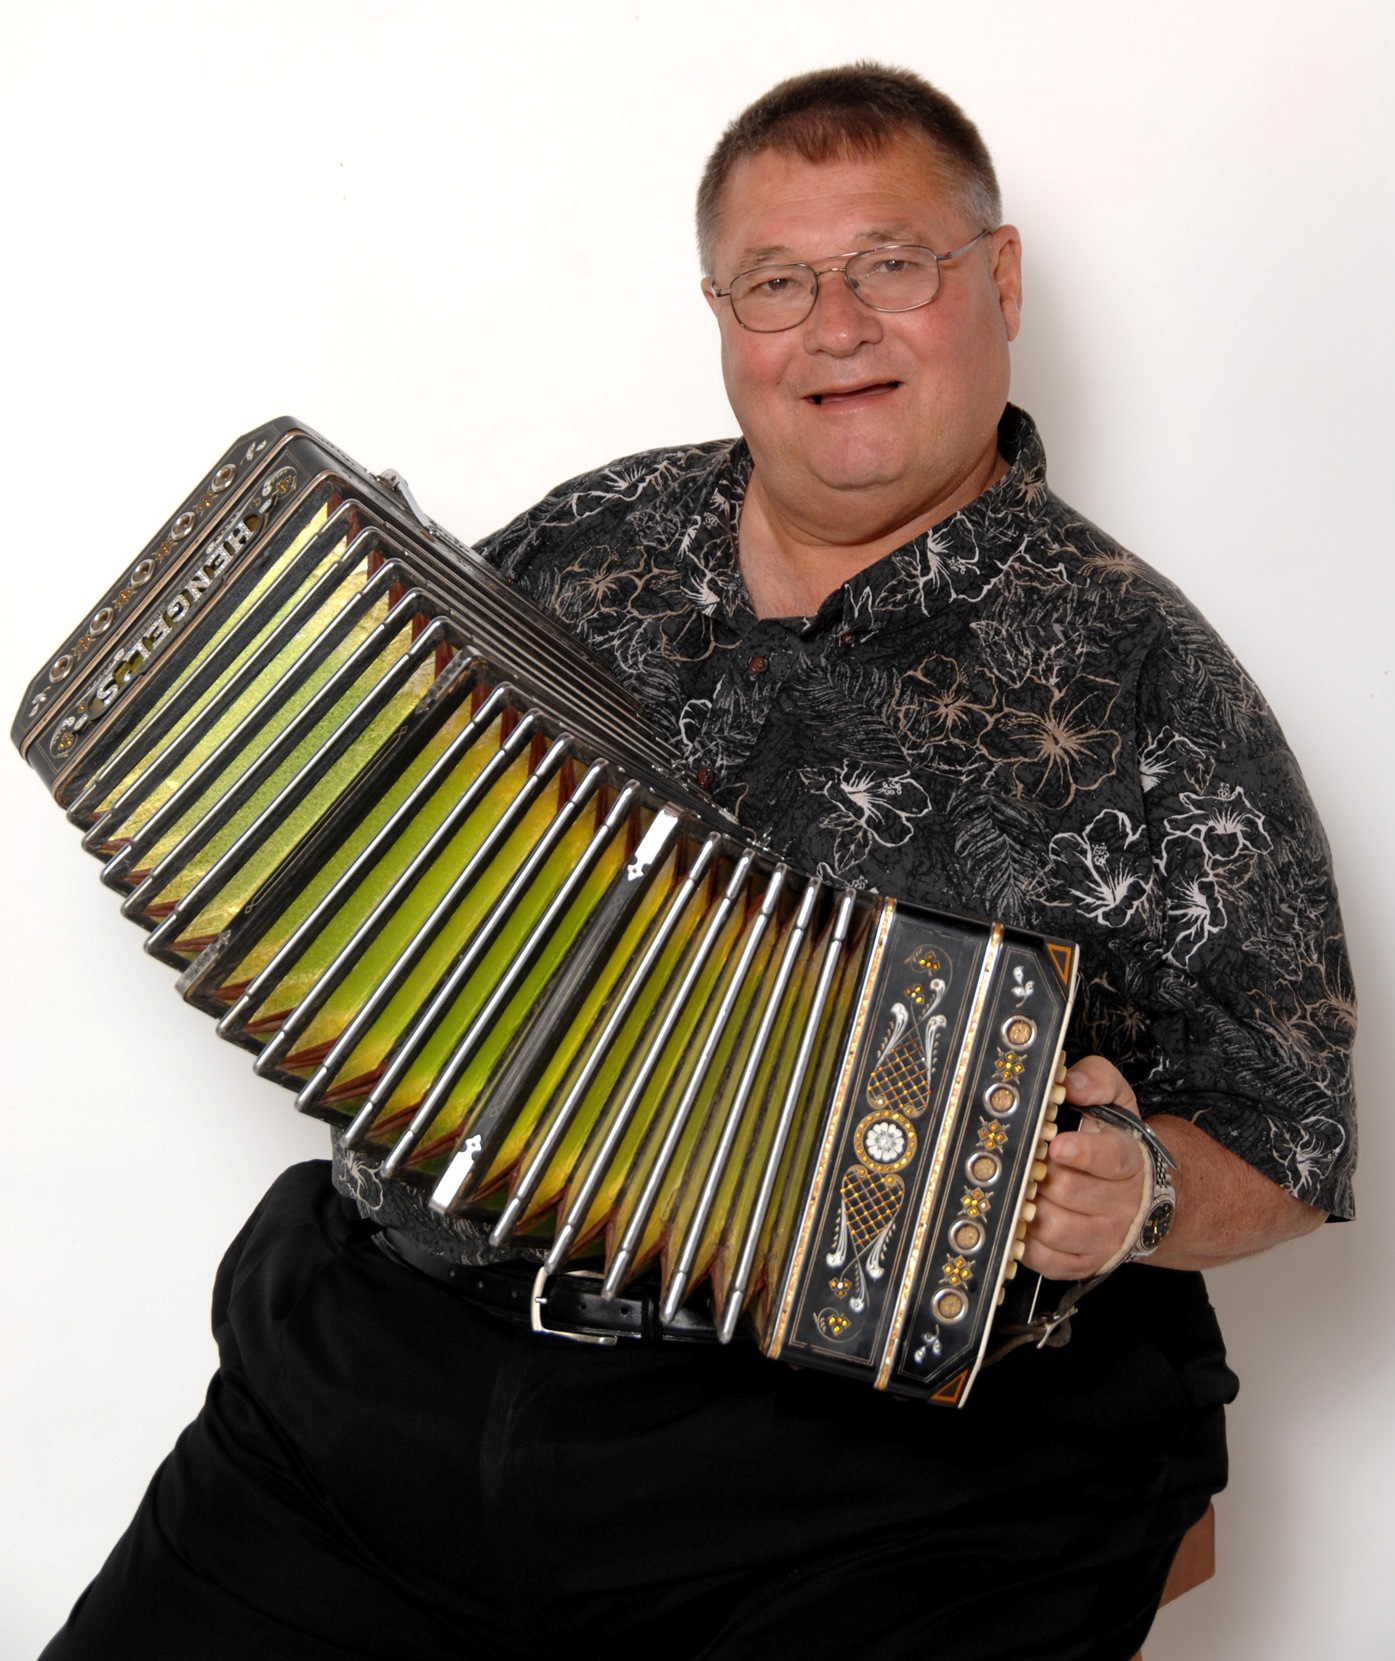 Peter Wendinger playing the accordion